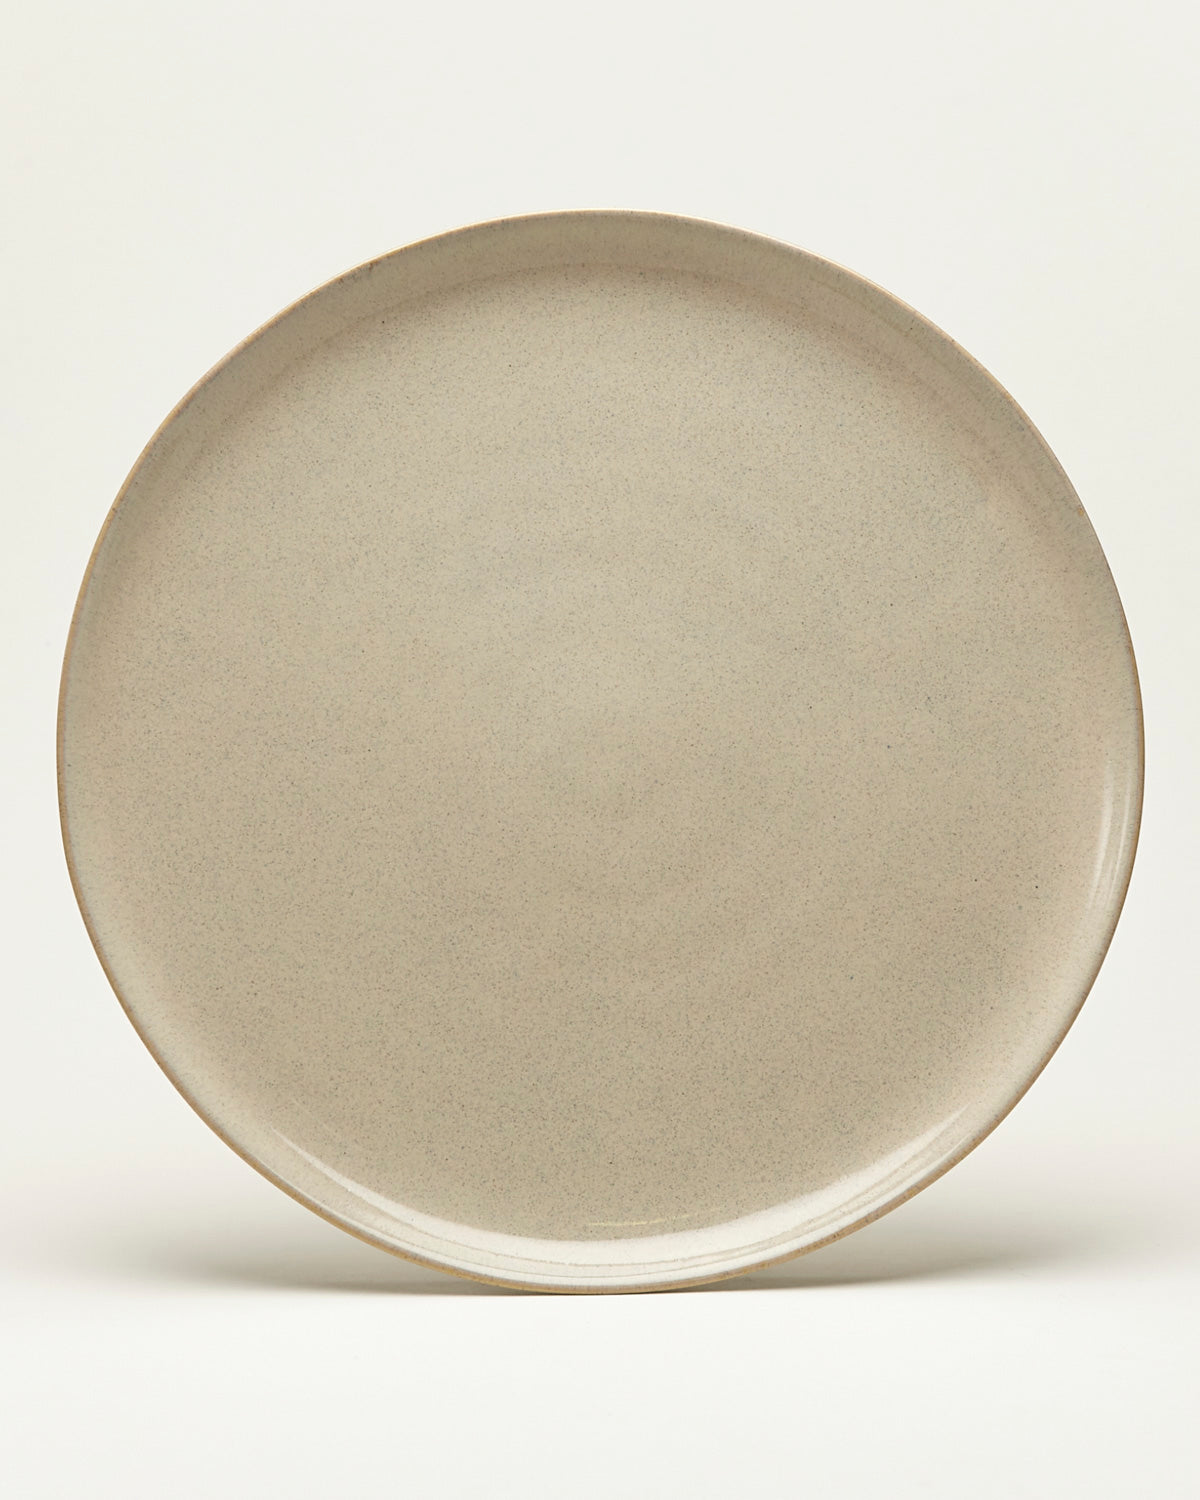 Big Plate (L) Limited - Traditional